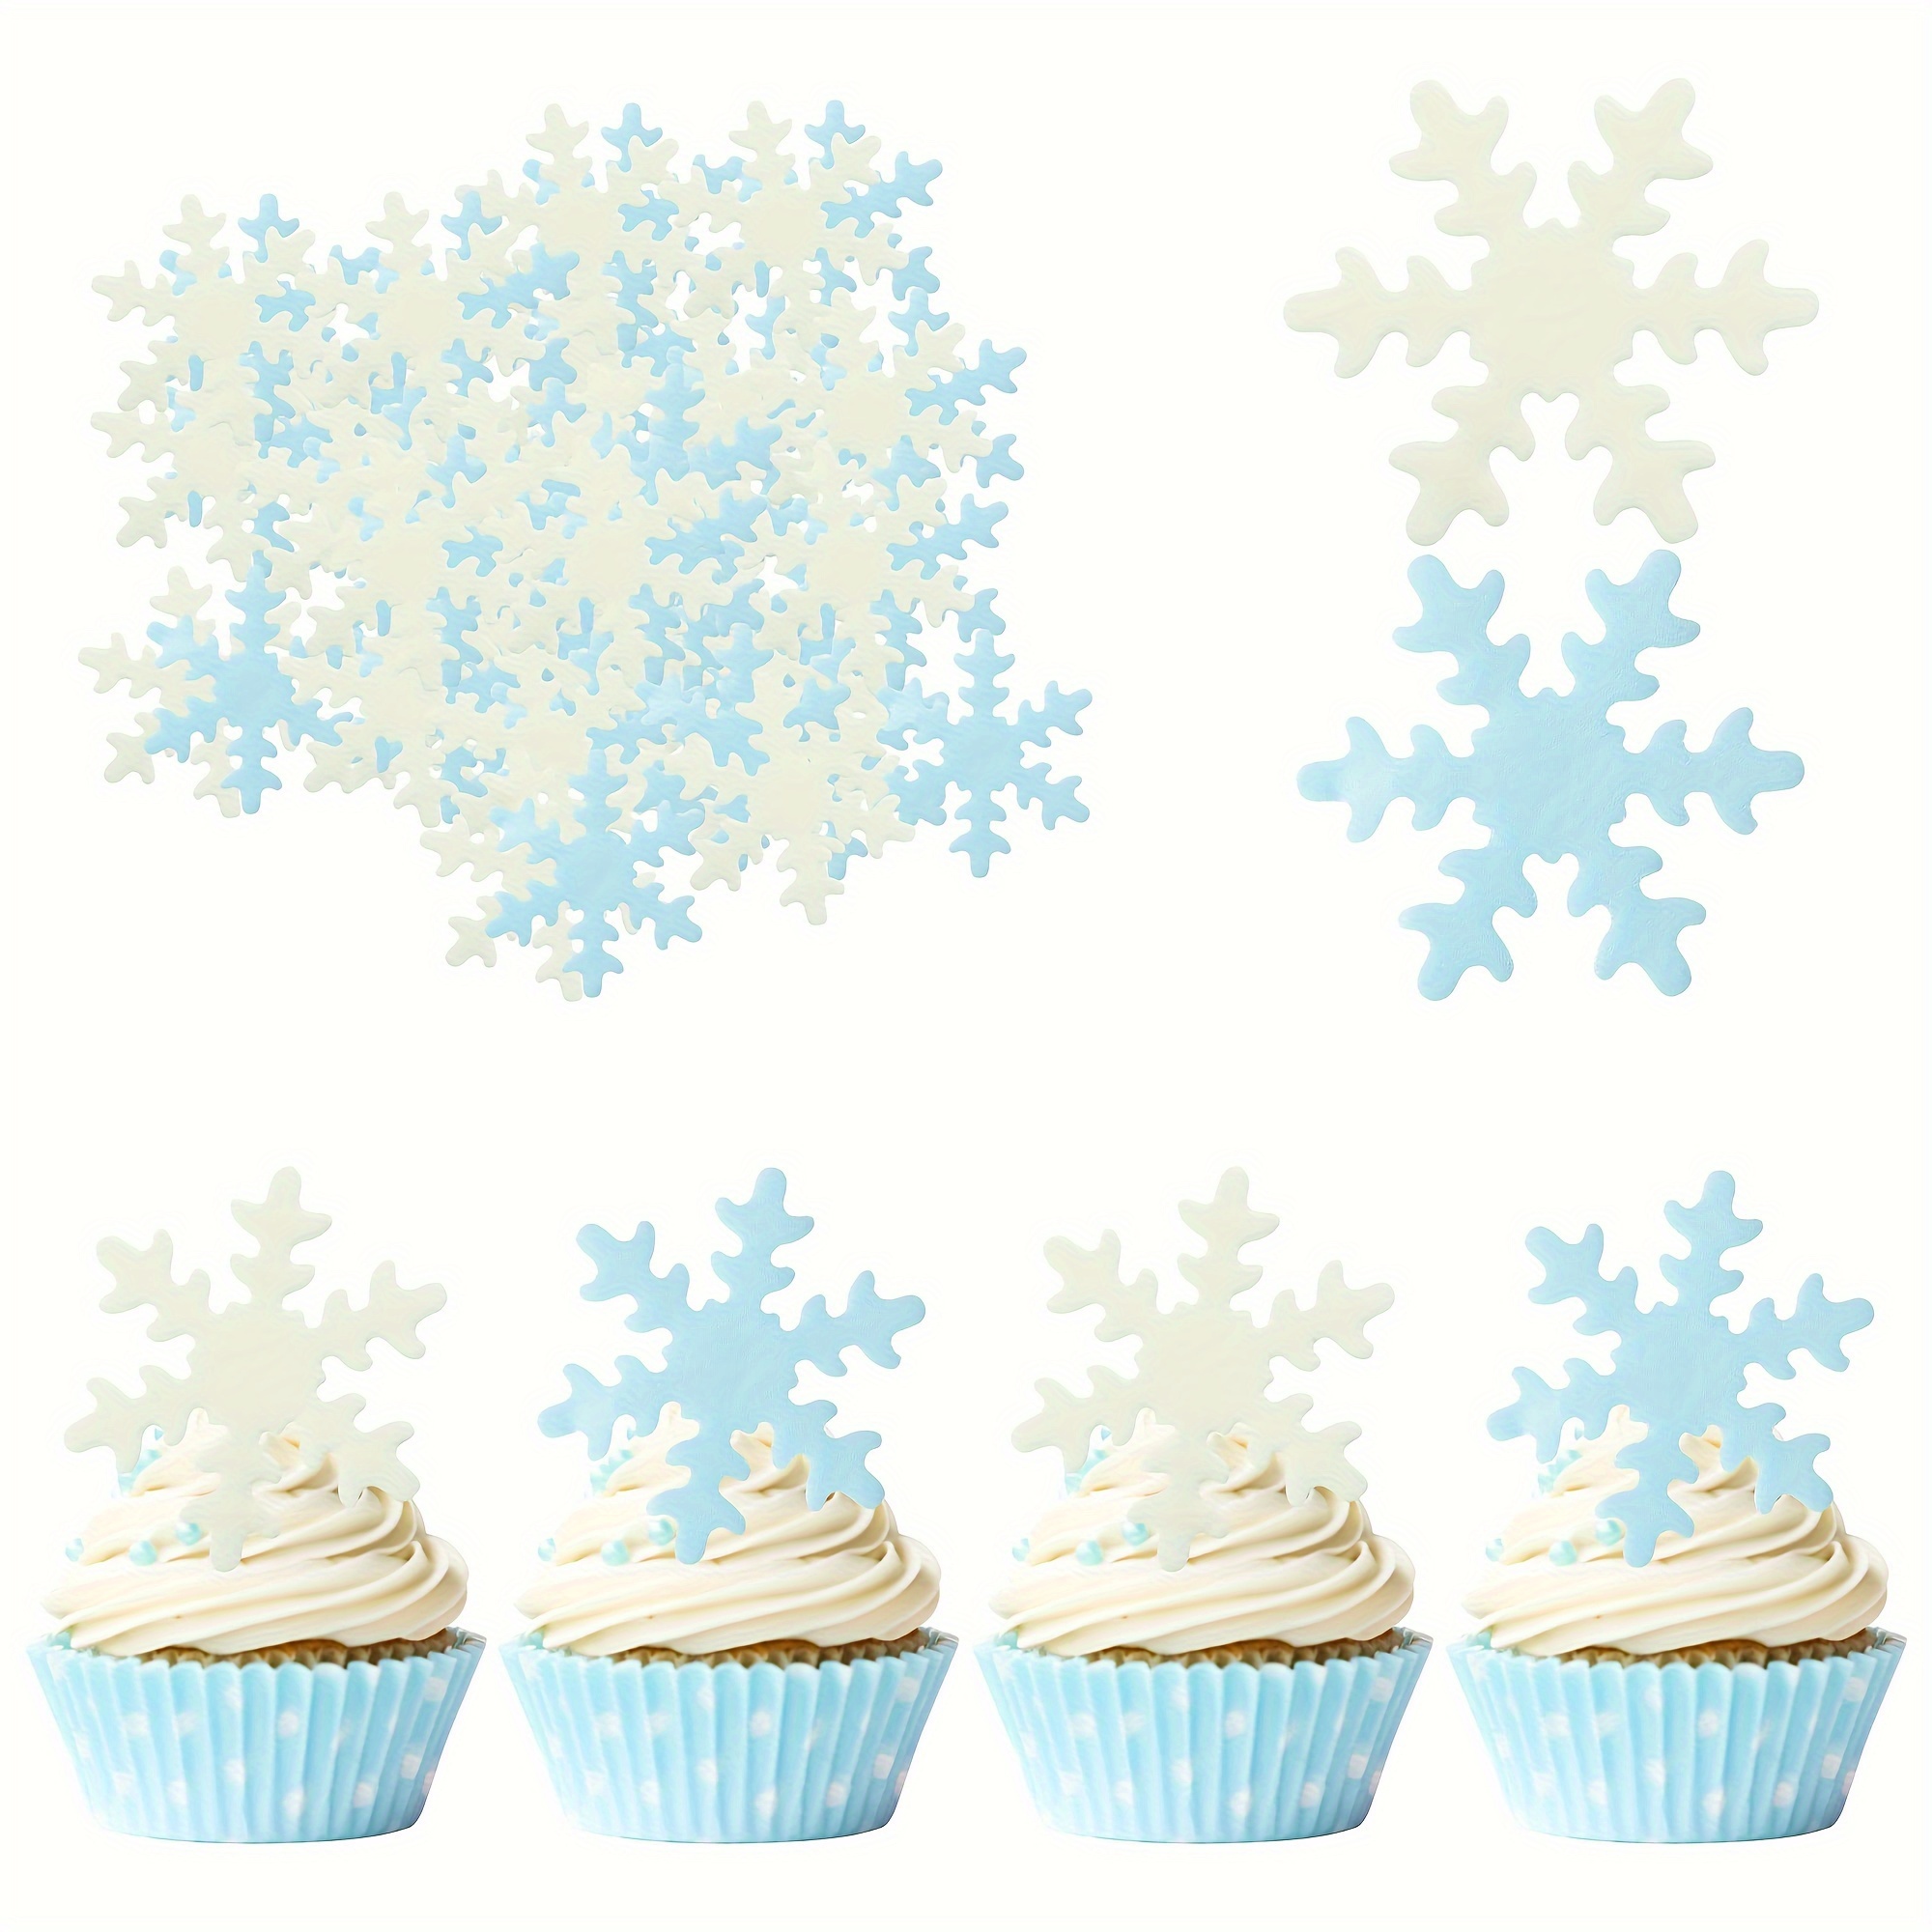 Frozen Rings | Cupcake Toppers